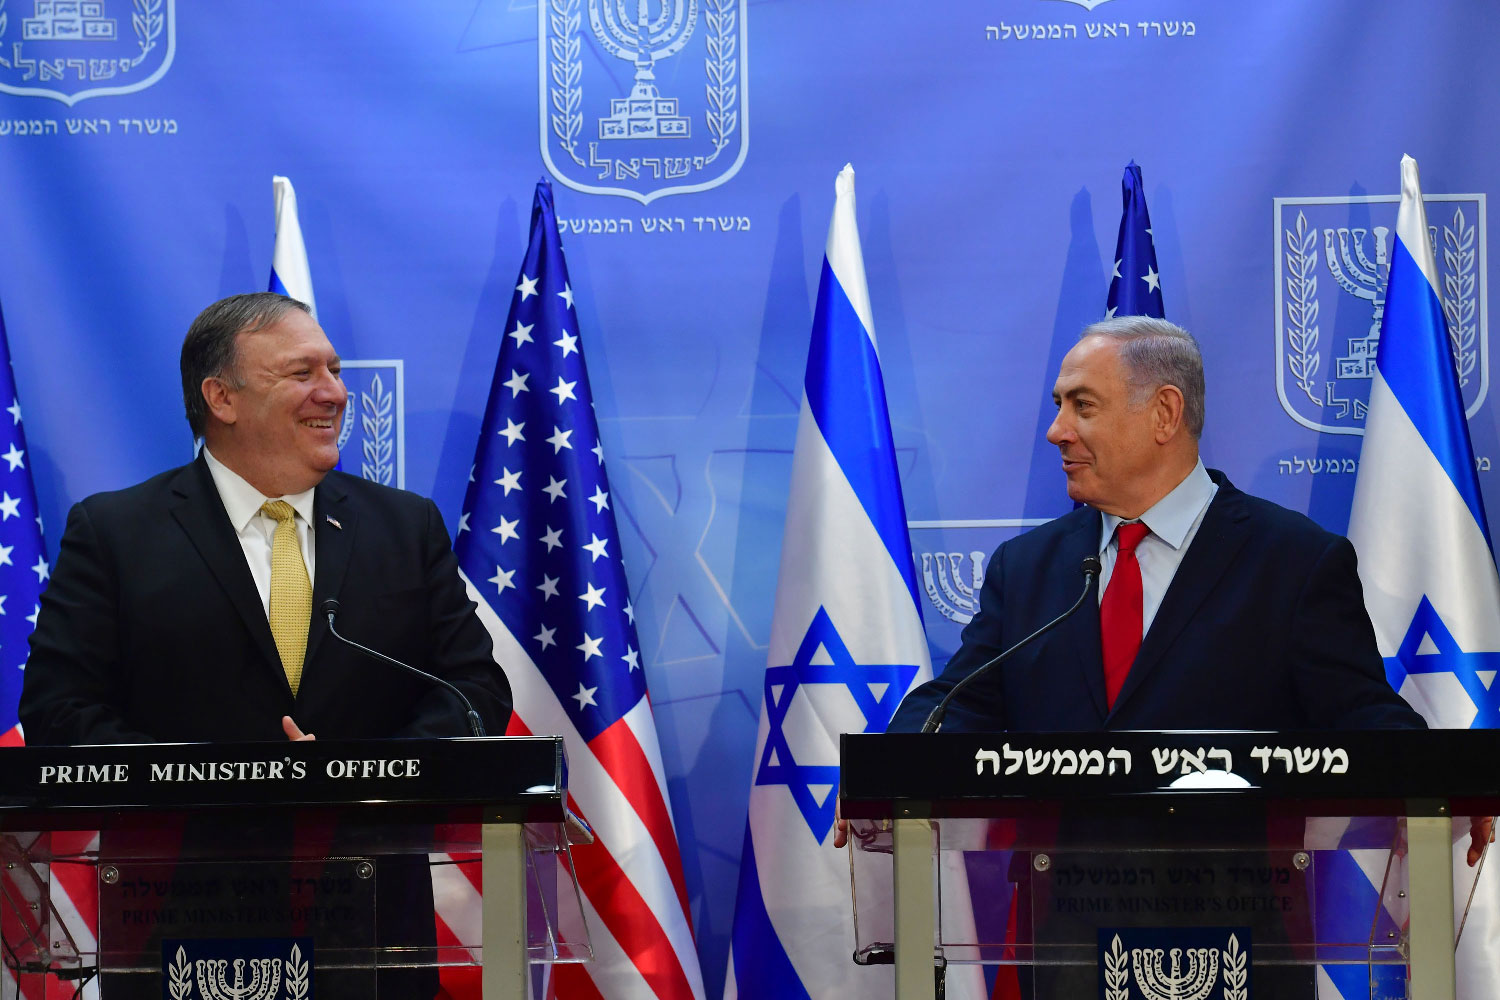 Israeli Prime Minister Benjamin Netanyahu (R) and US Secretary of State Mike Pompeo attend a joint press conference after their meeting on 20 March, 2019.